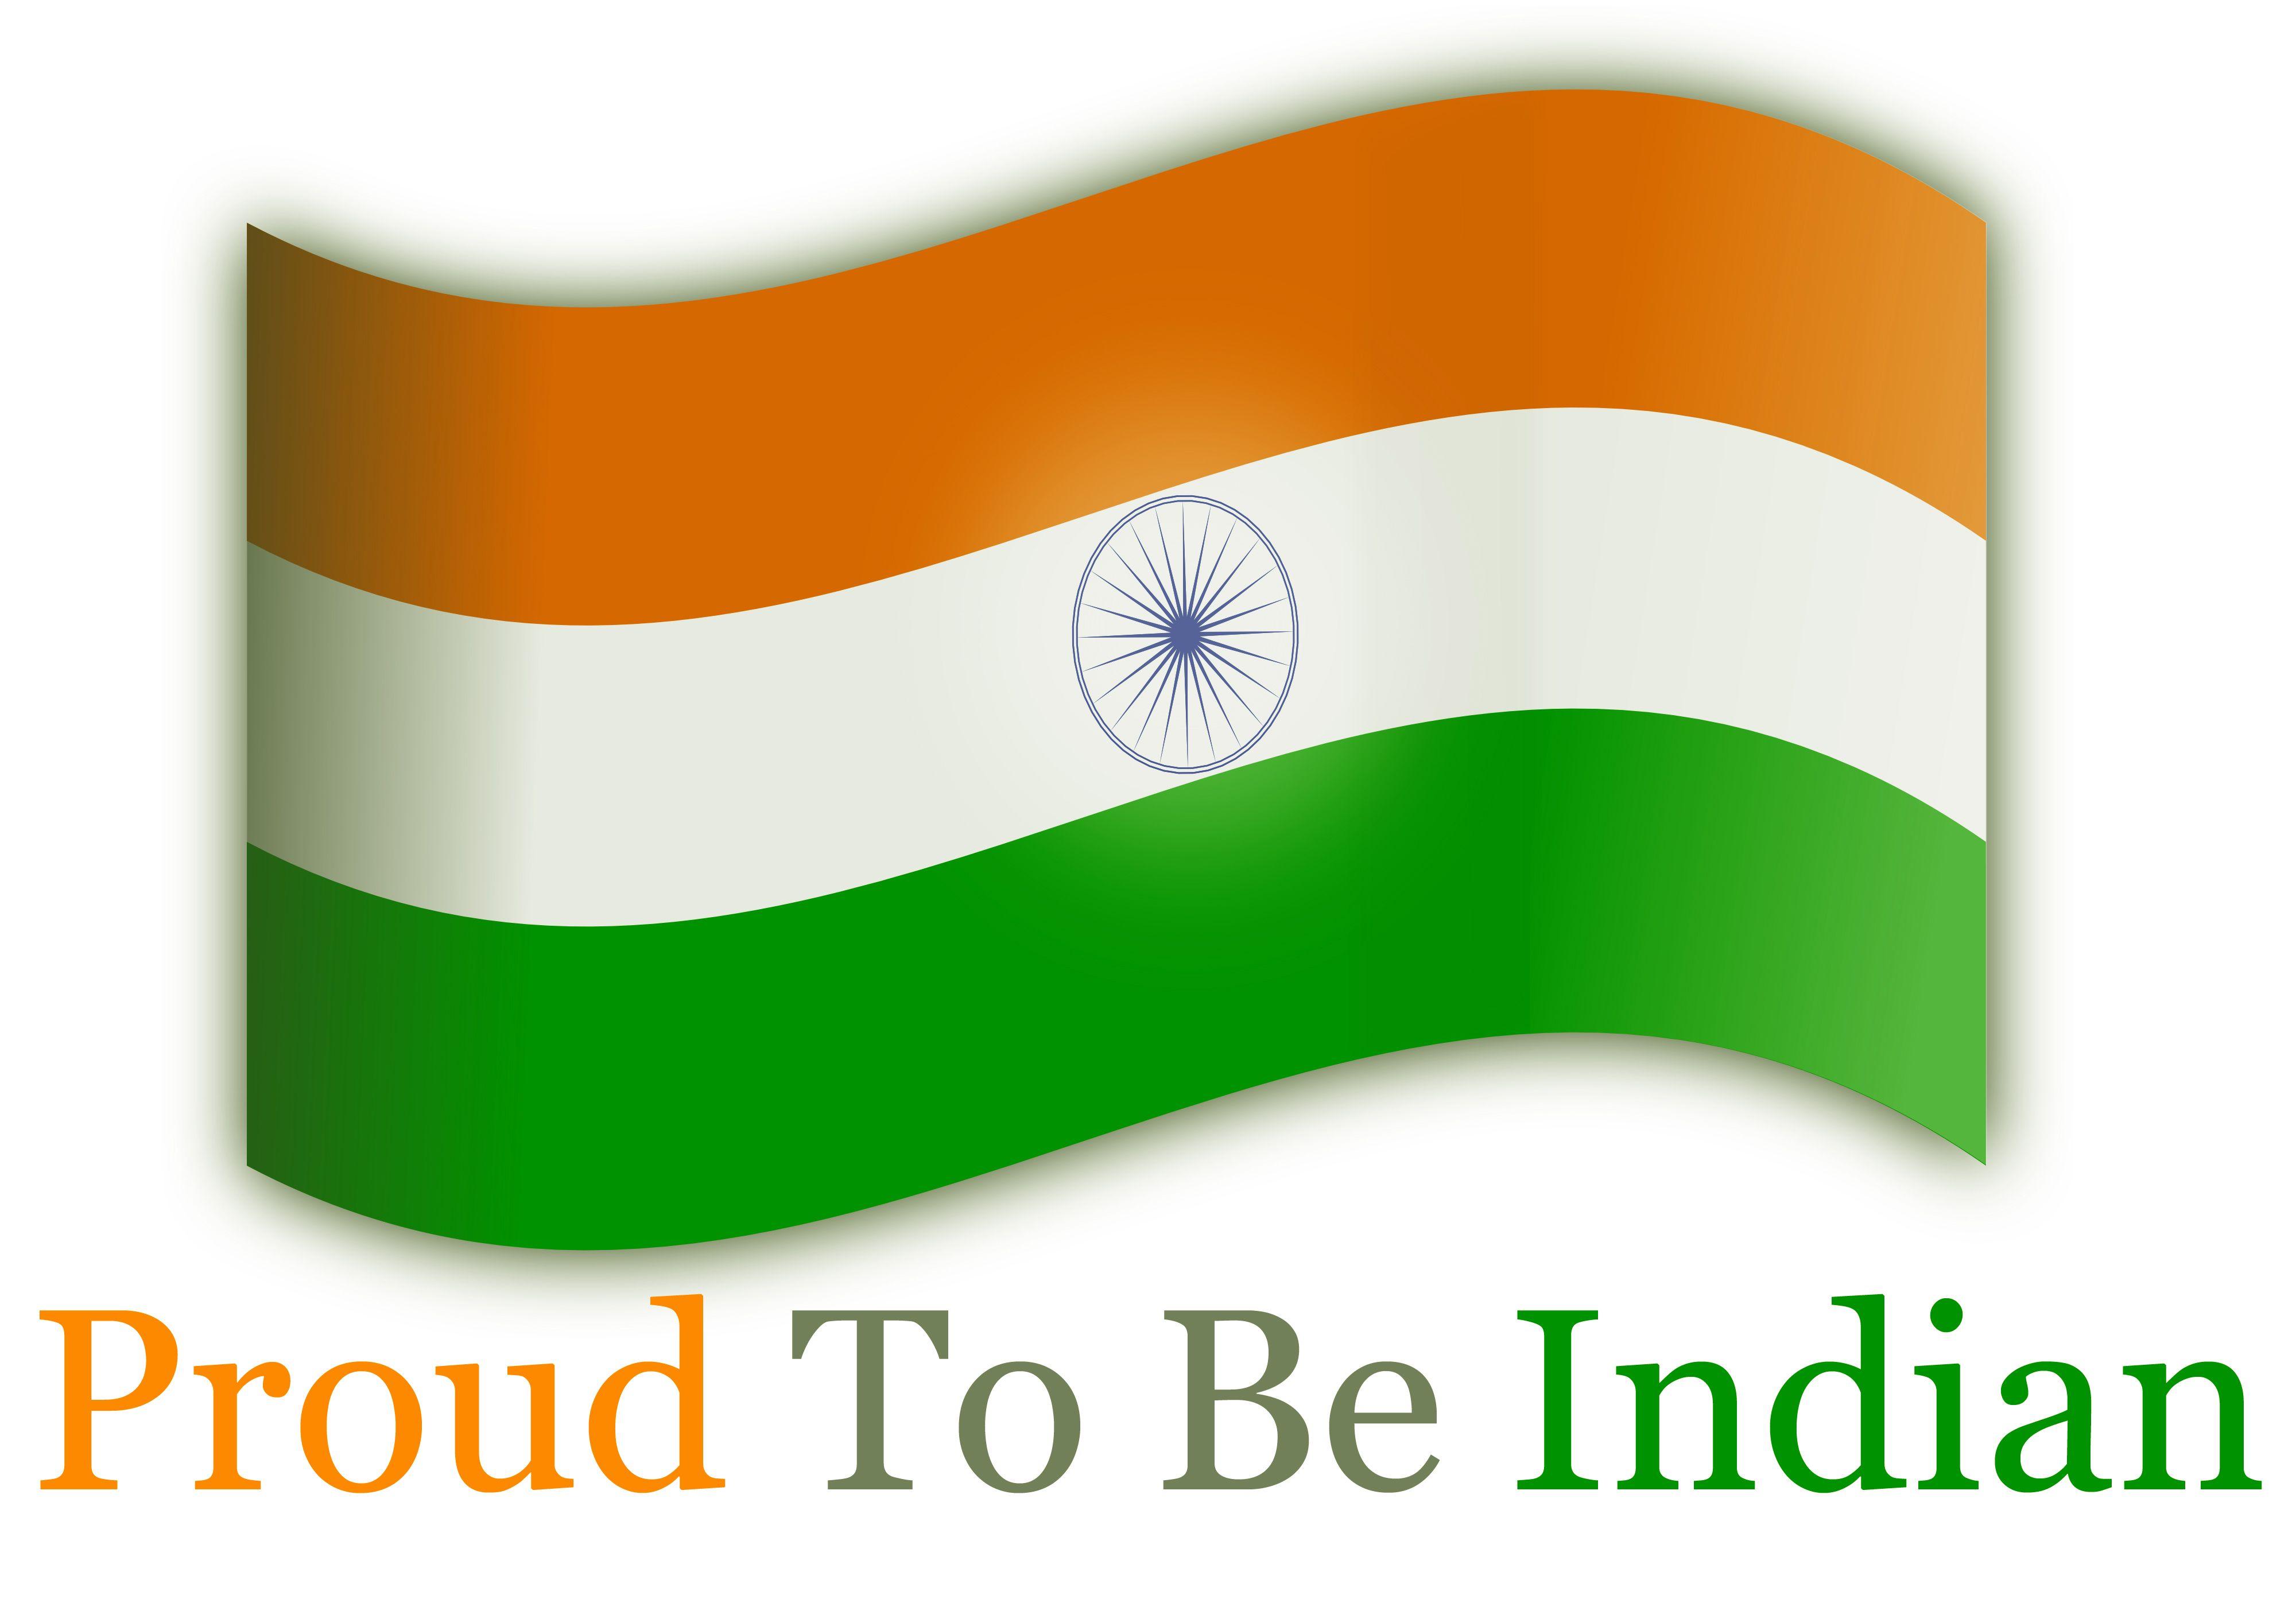 New} Indian Flag HD Wallpaper Image 2021 Independence Day